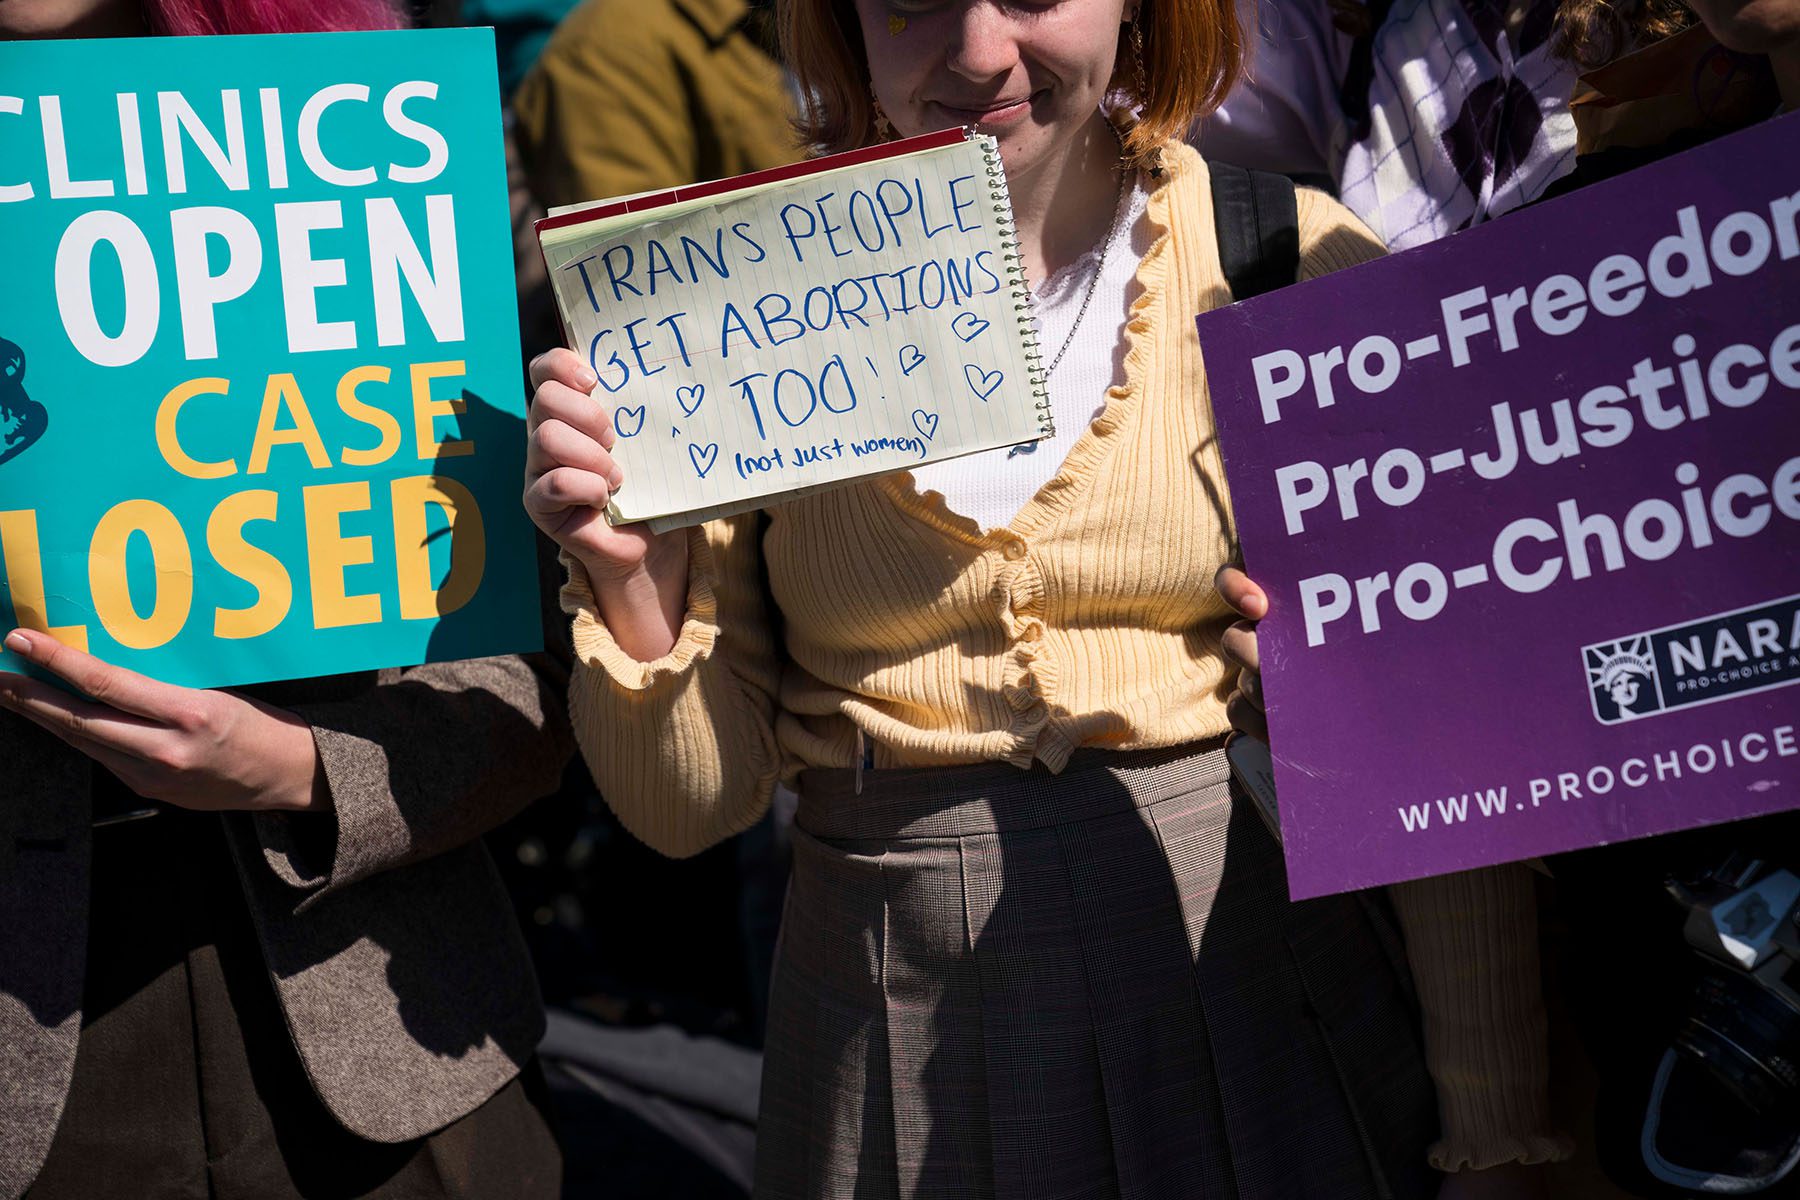 A demonstrator holds up a note that reads "Trans People Get Abortions Too!" (not just women) in the midst of a protest.